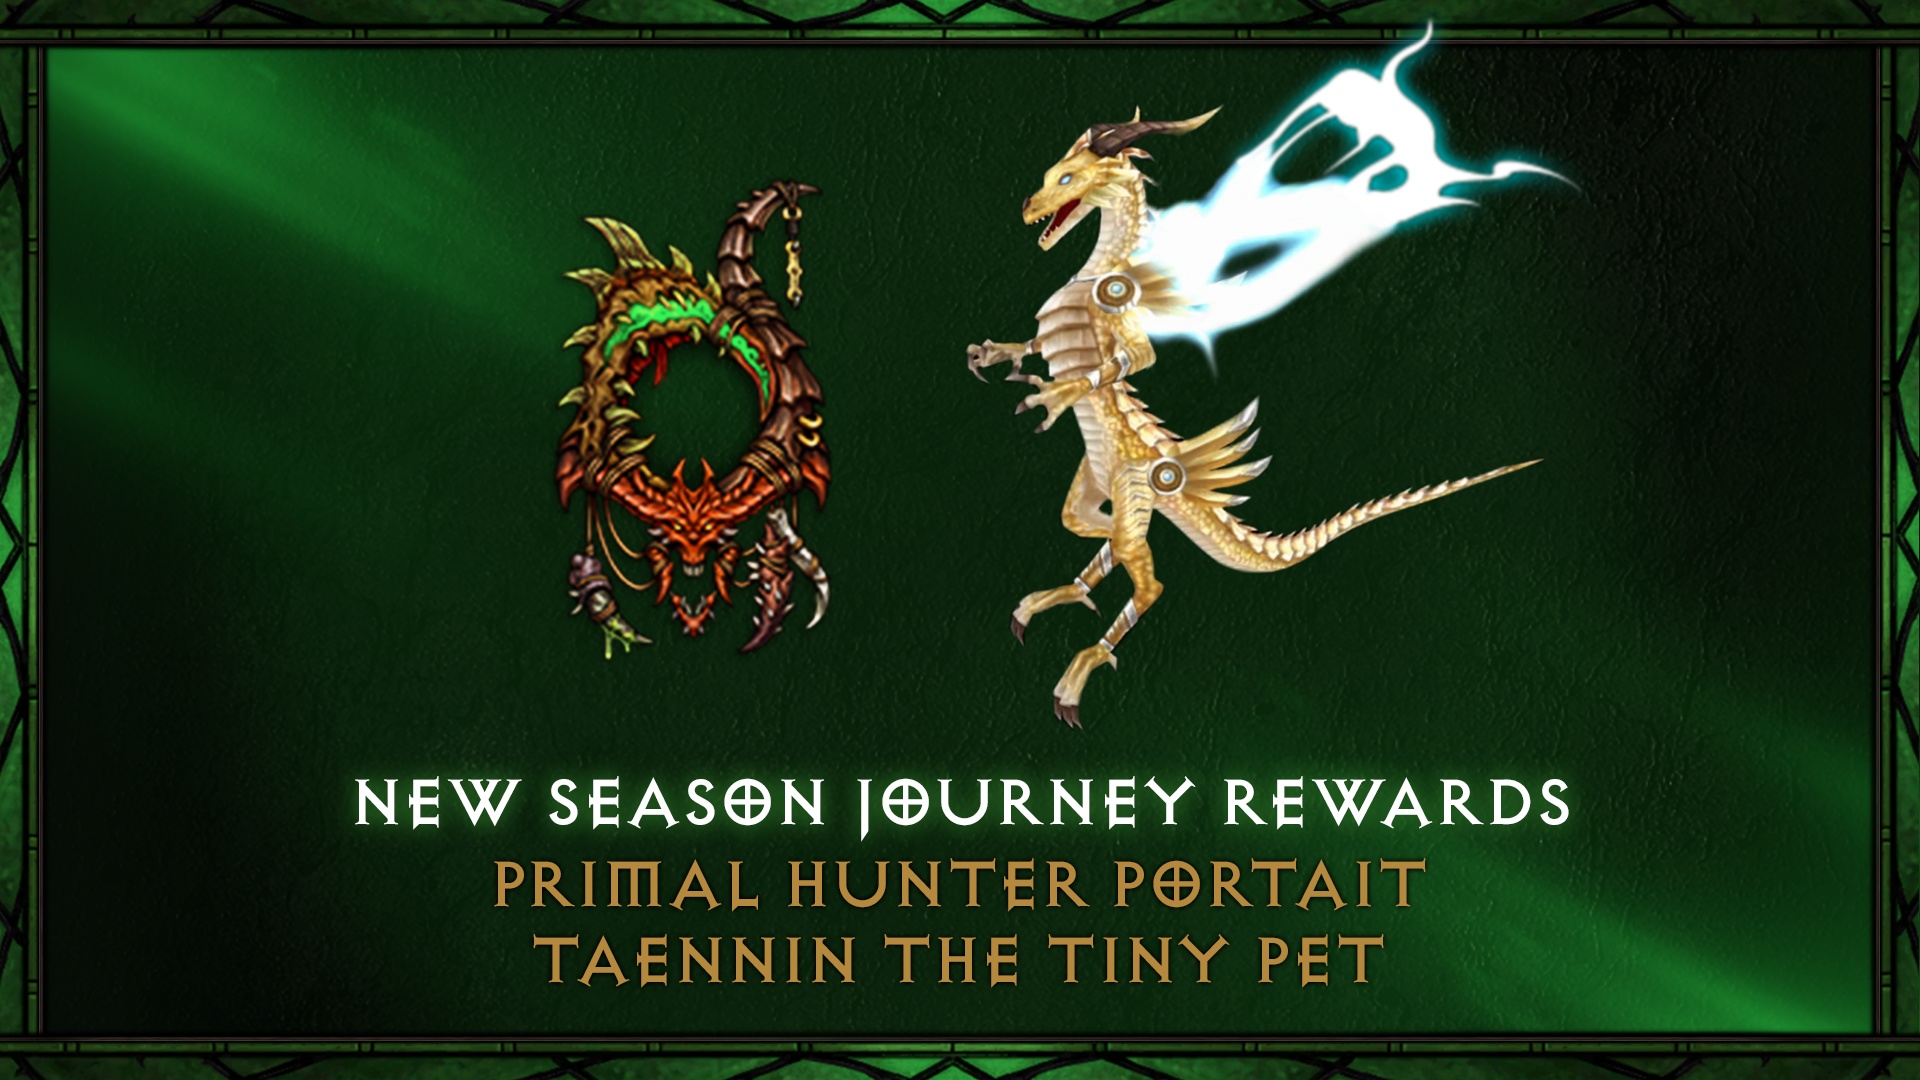 (These two rewards are for completing the season journey.)